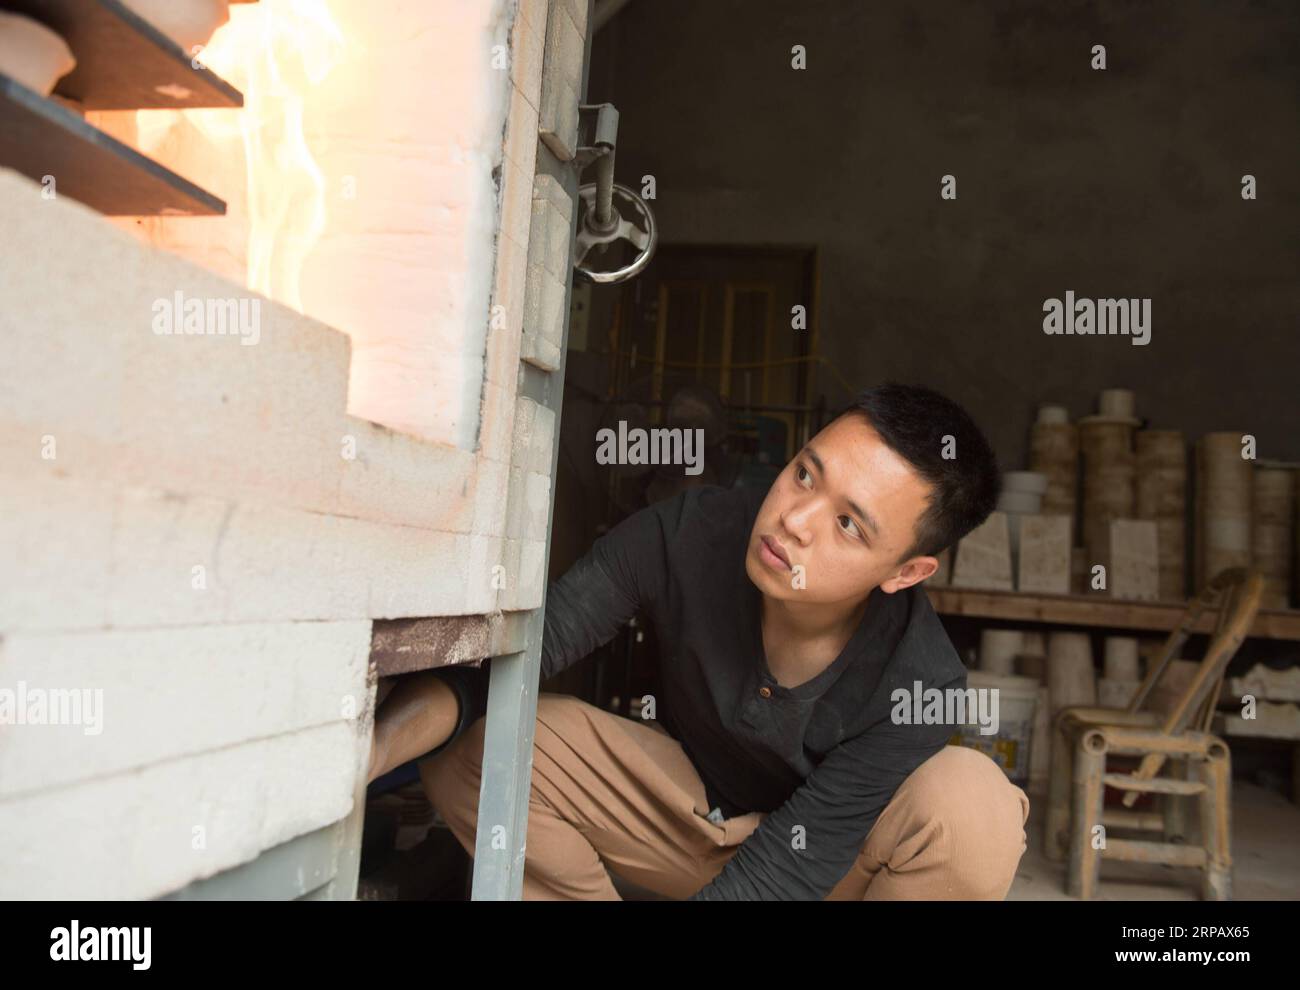 (190520) -- LONGQUAN, May 20, 2019 (Xinhua) -- Lin Song makes celadon incense burners using a gas kiln at his studio in Longquan, east China s Zhejiang Province, May 20, 2019. Born in 1993, Lin Song is a native of Longquan, home to China s best celadon wares. He received professional training in both his hometown and Jingdezhen, another important porcelain hub of China. Lin had also followed other celadon artisans for years before setting up a studio back home in 2014, focusing on the replication of classical celadon incense burners. Lin s personal collection has grown to over 40 celadon incen Stock Photo